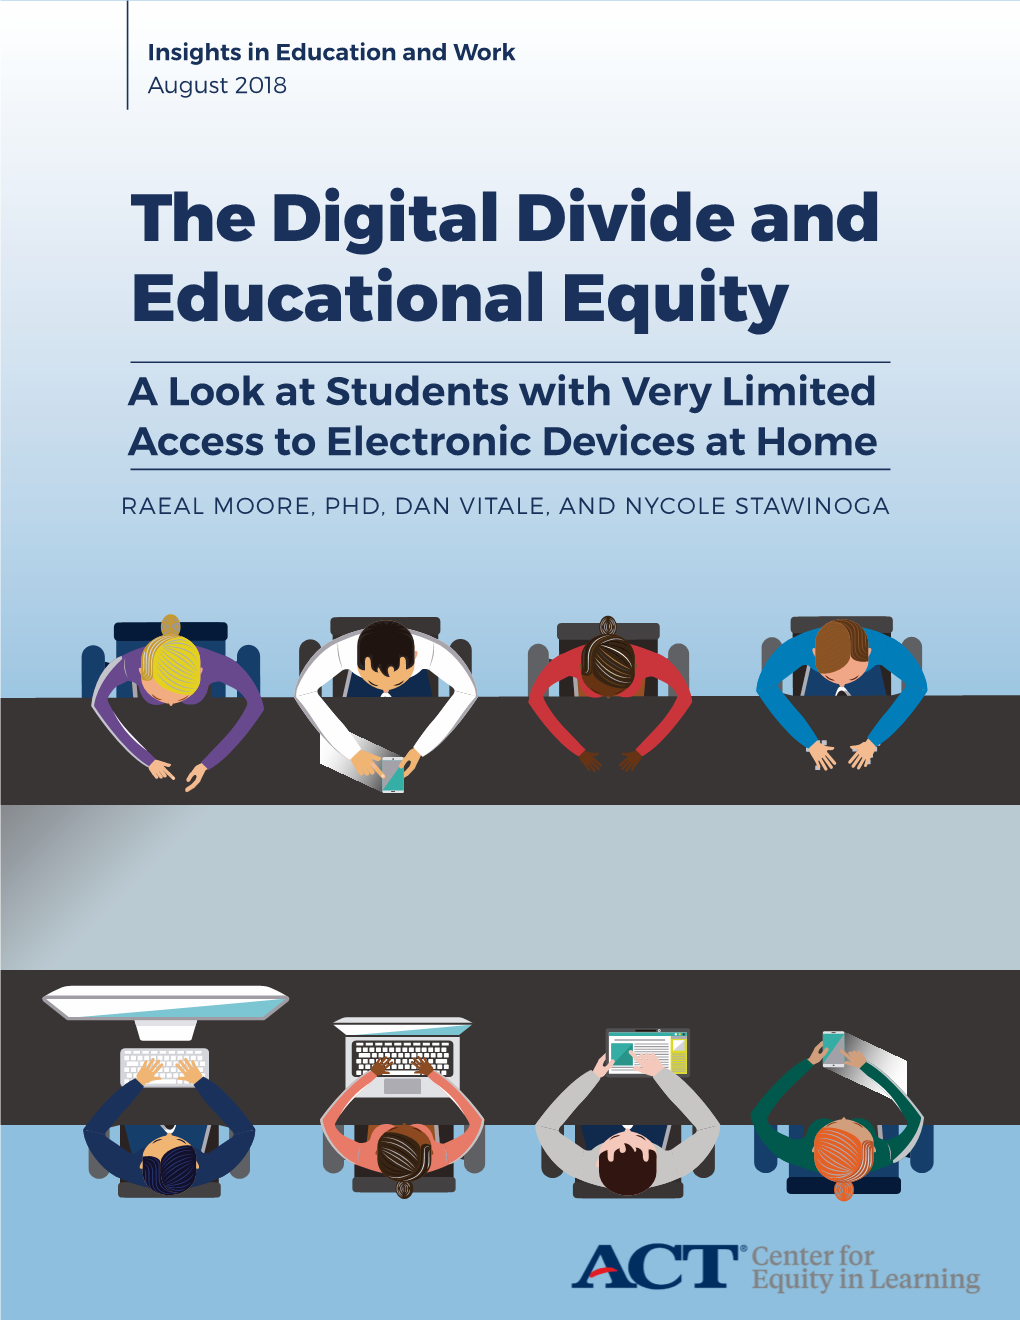 The Digital Divide and Educational Equity a Look at Students with Very Limited Access to Electronic Devices at Home